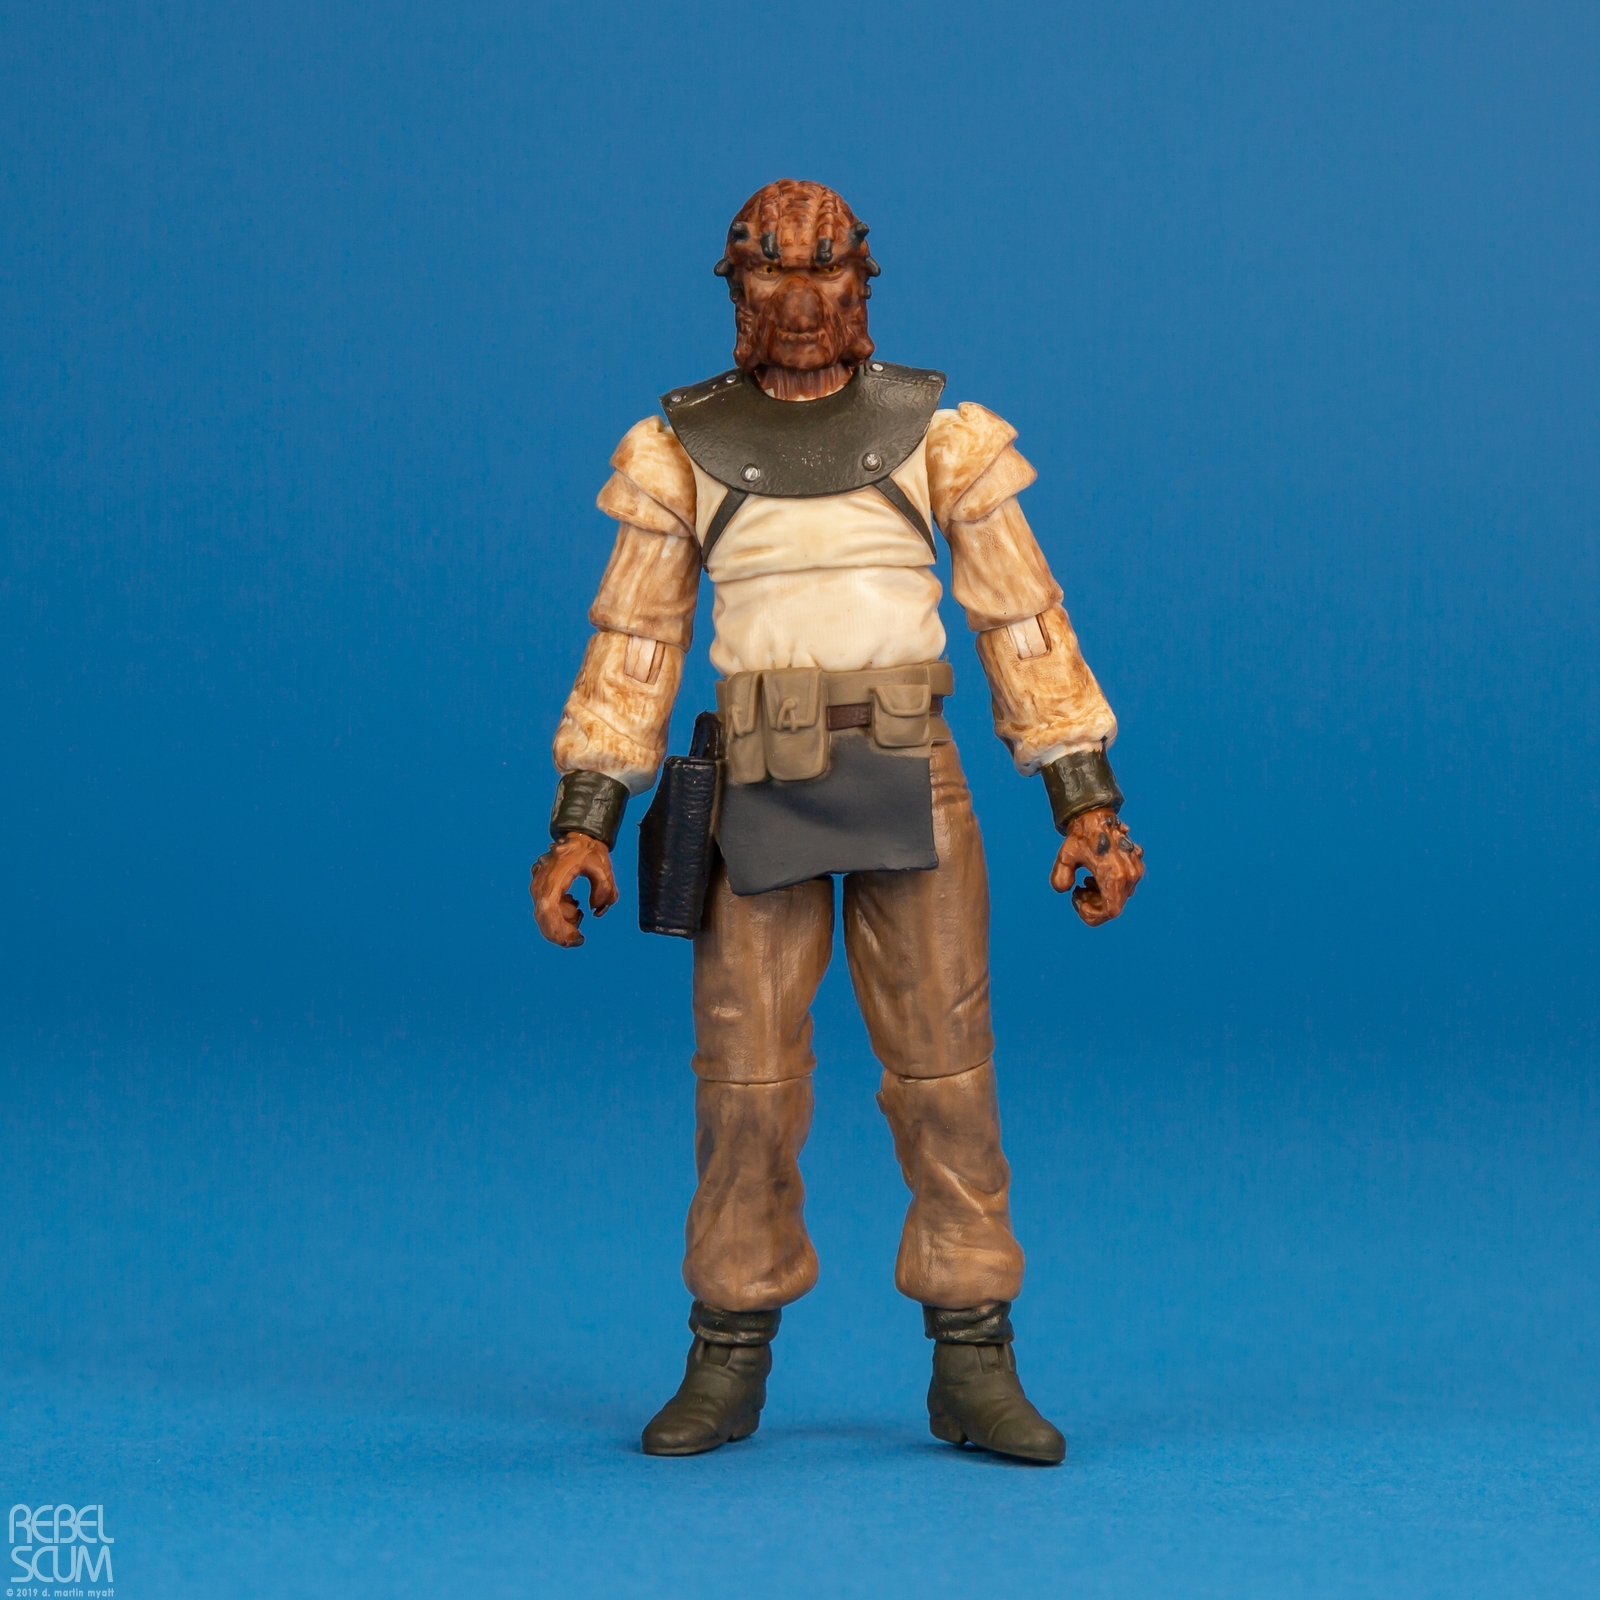 Special-3-Action-Figures-Set-The-Vintage-Collection-001.jpg